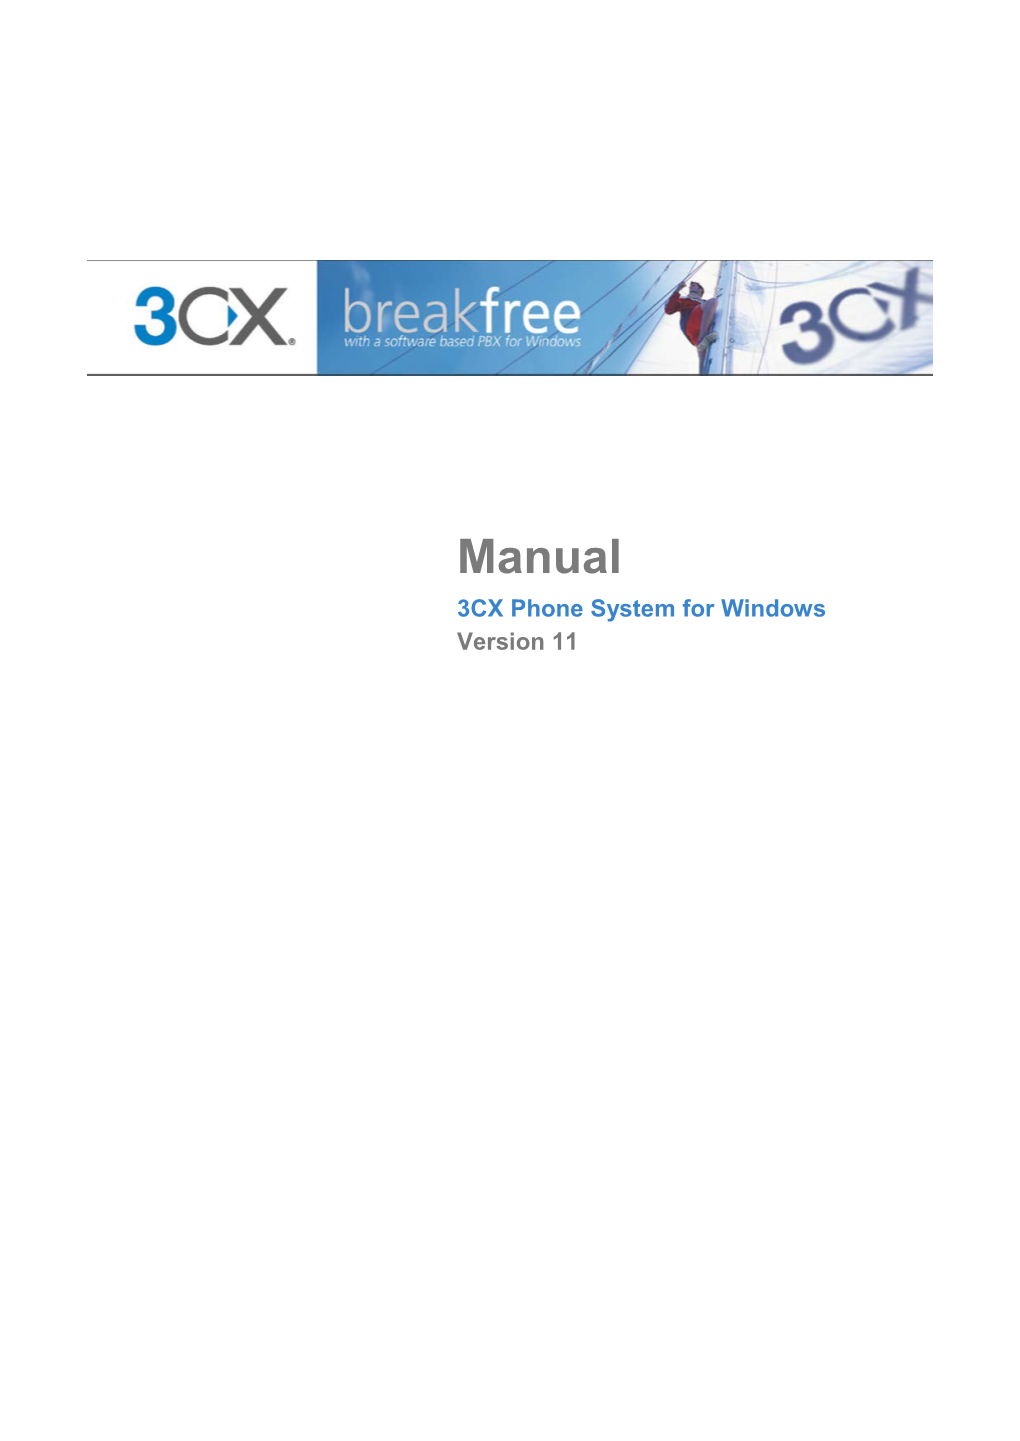 3CX Phone System for Windows Manual